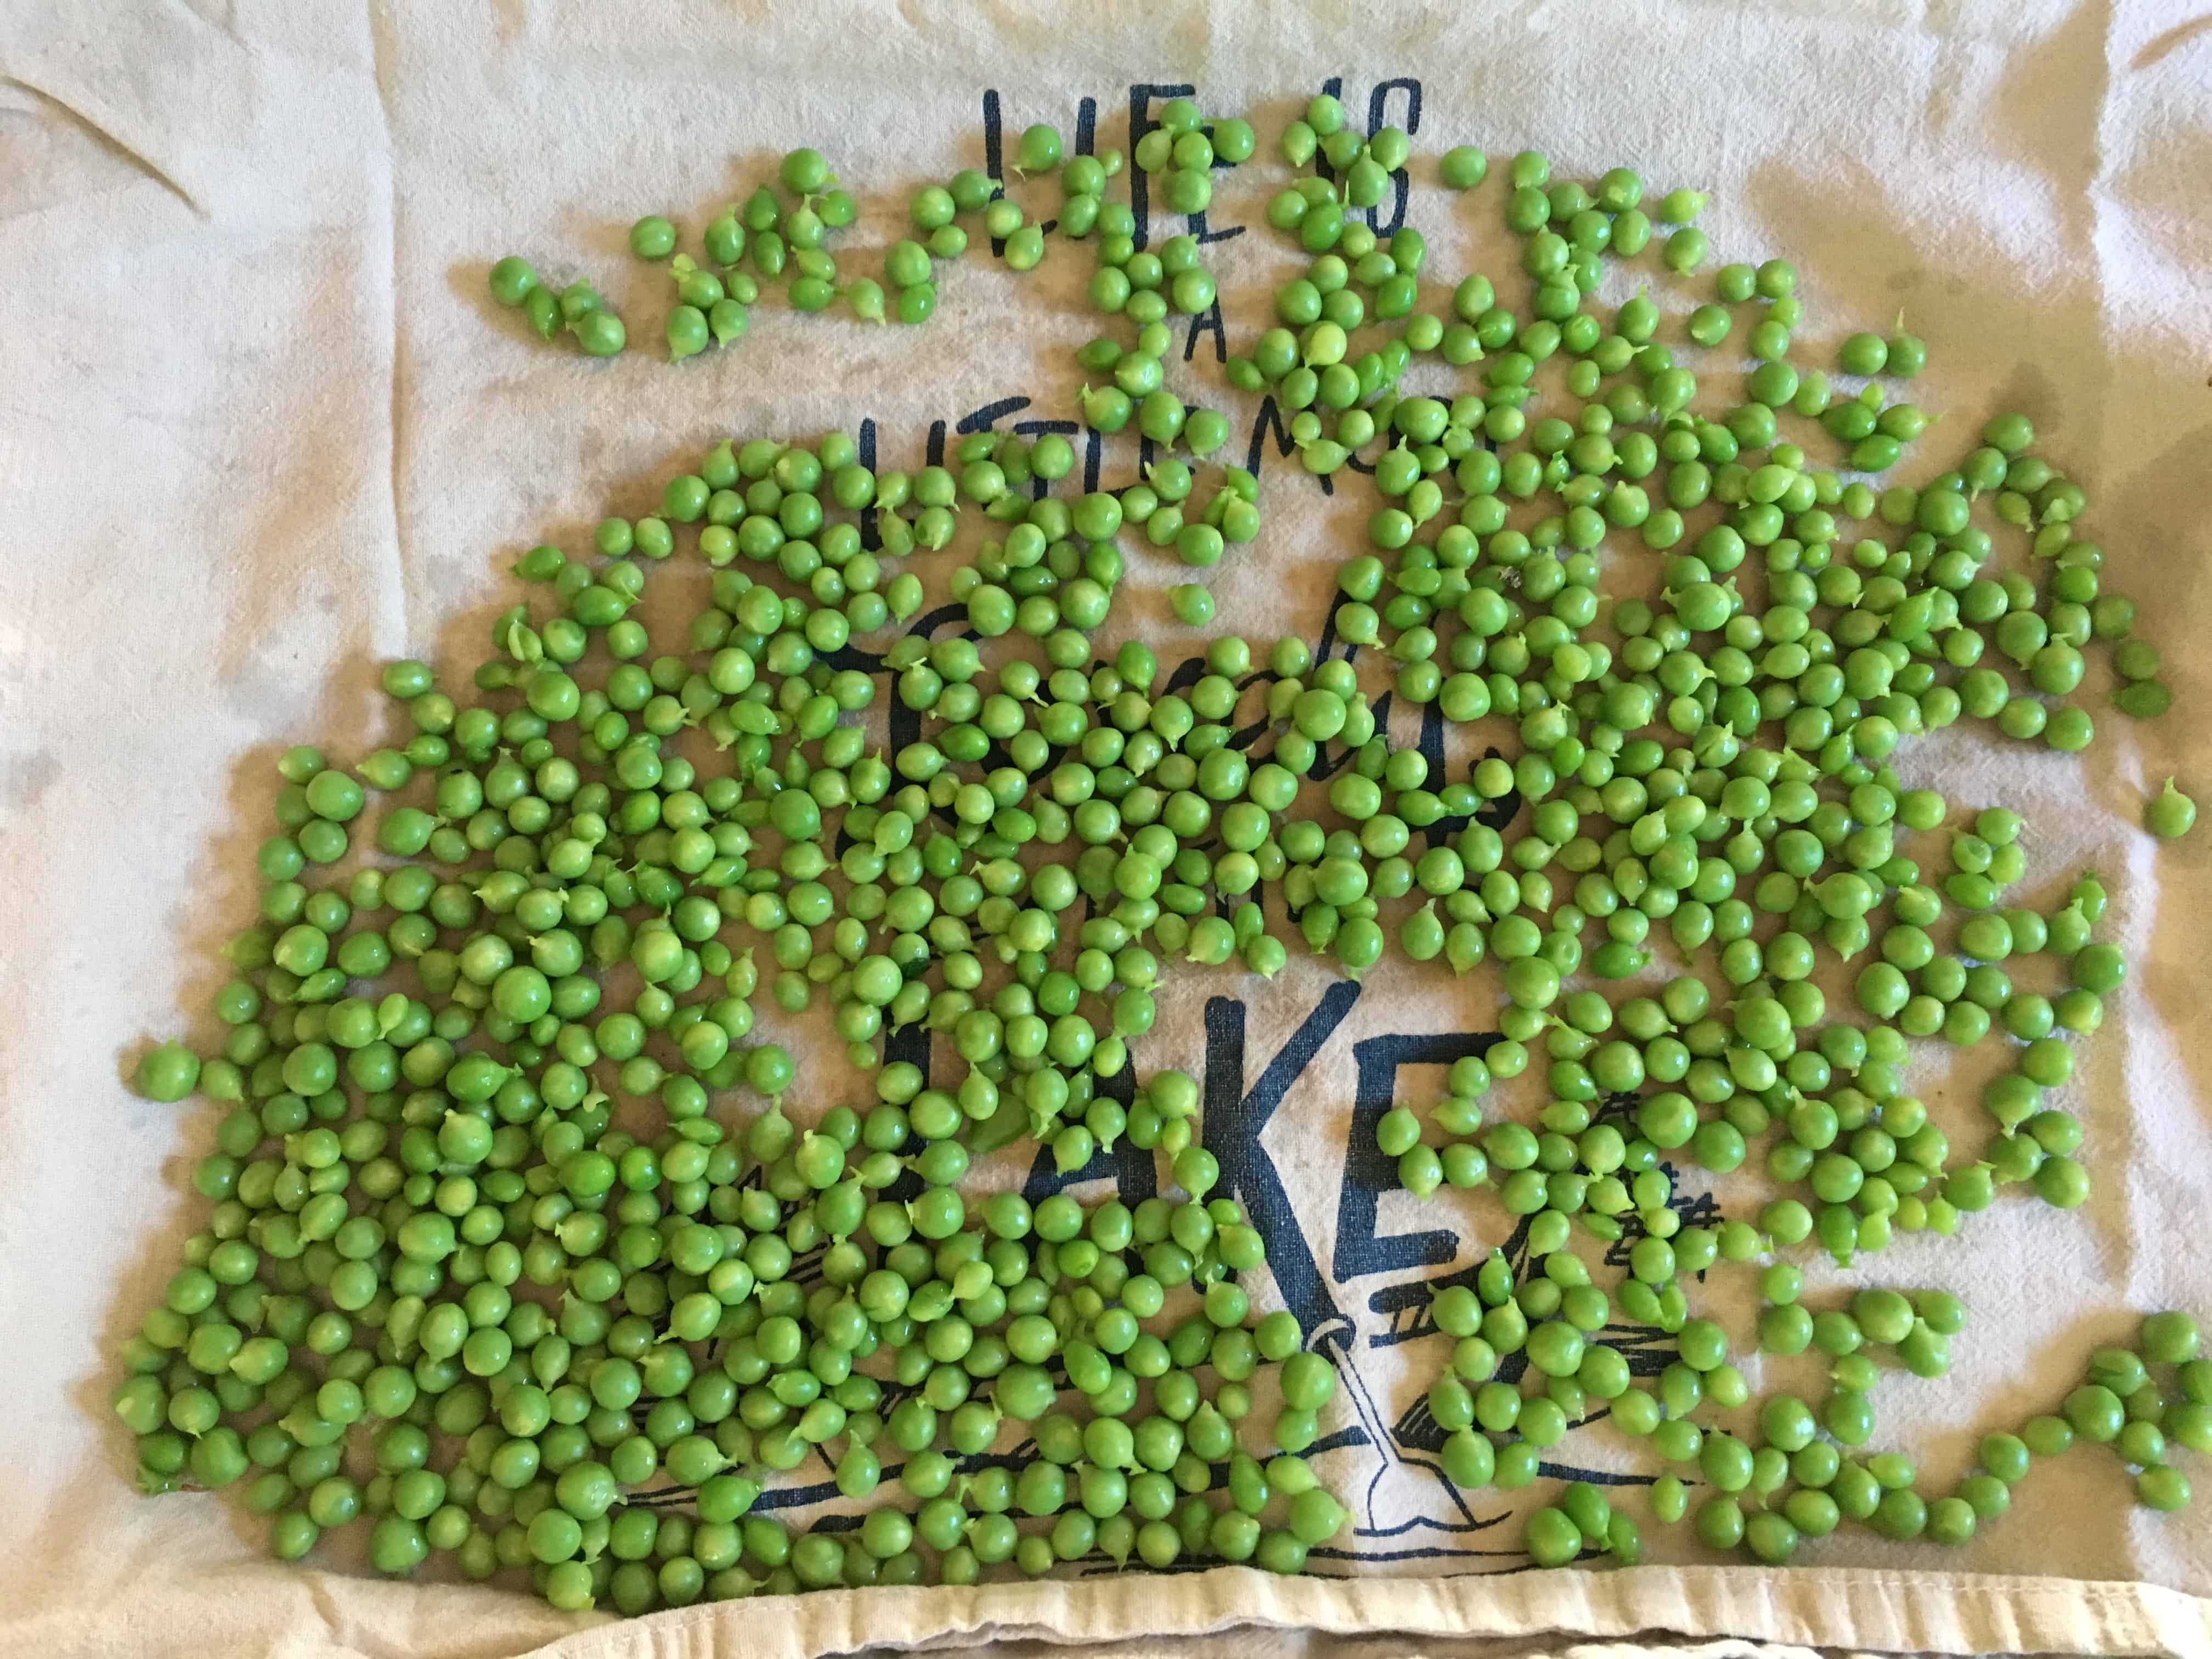 Blanched peas on towel ready for the freezer. https://trimazing.com/" 